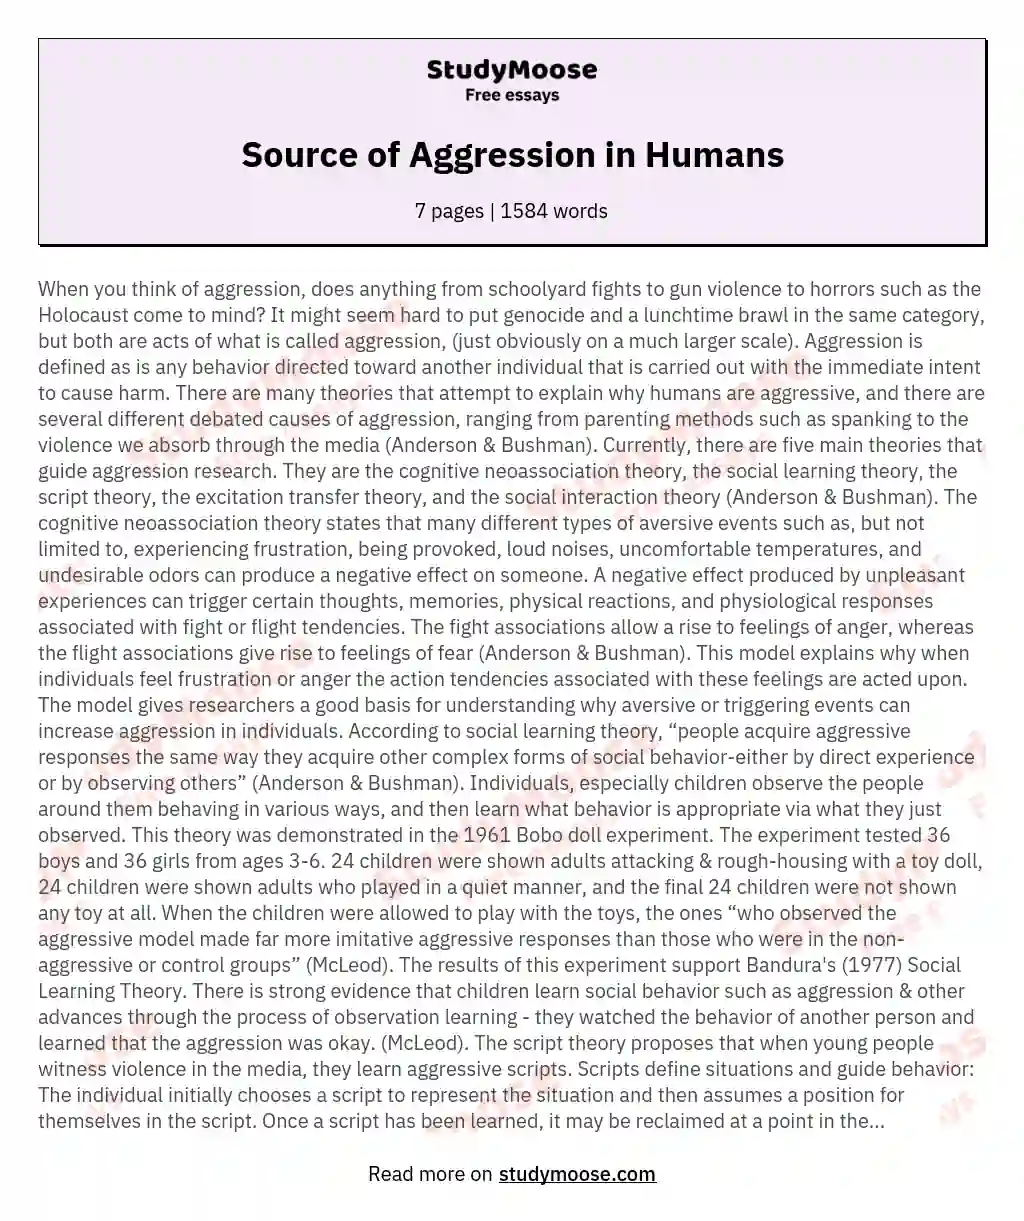 Source of Aggression in Humans essay